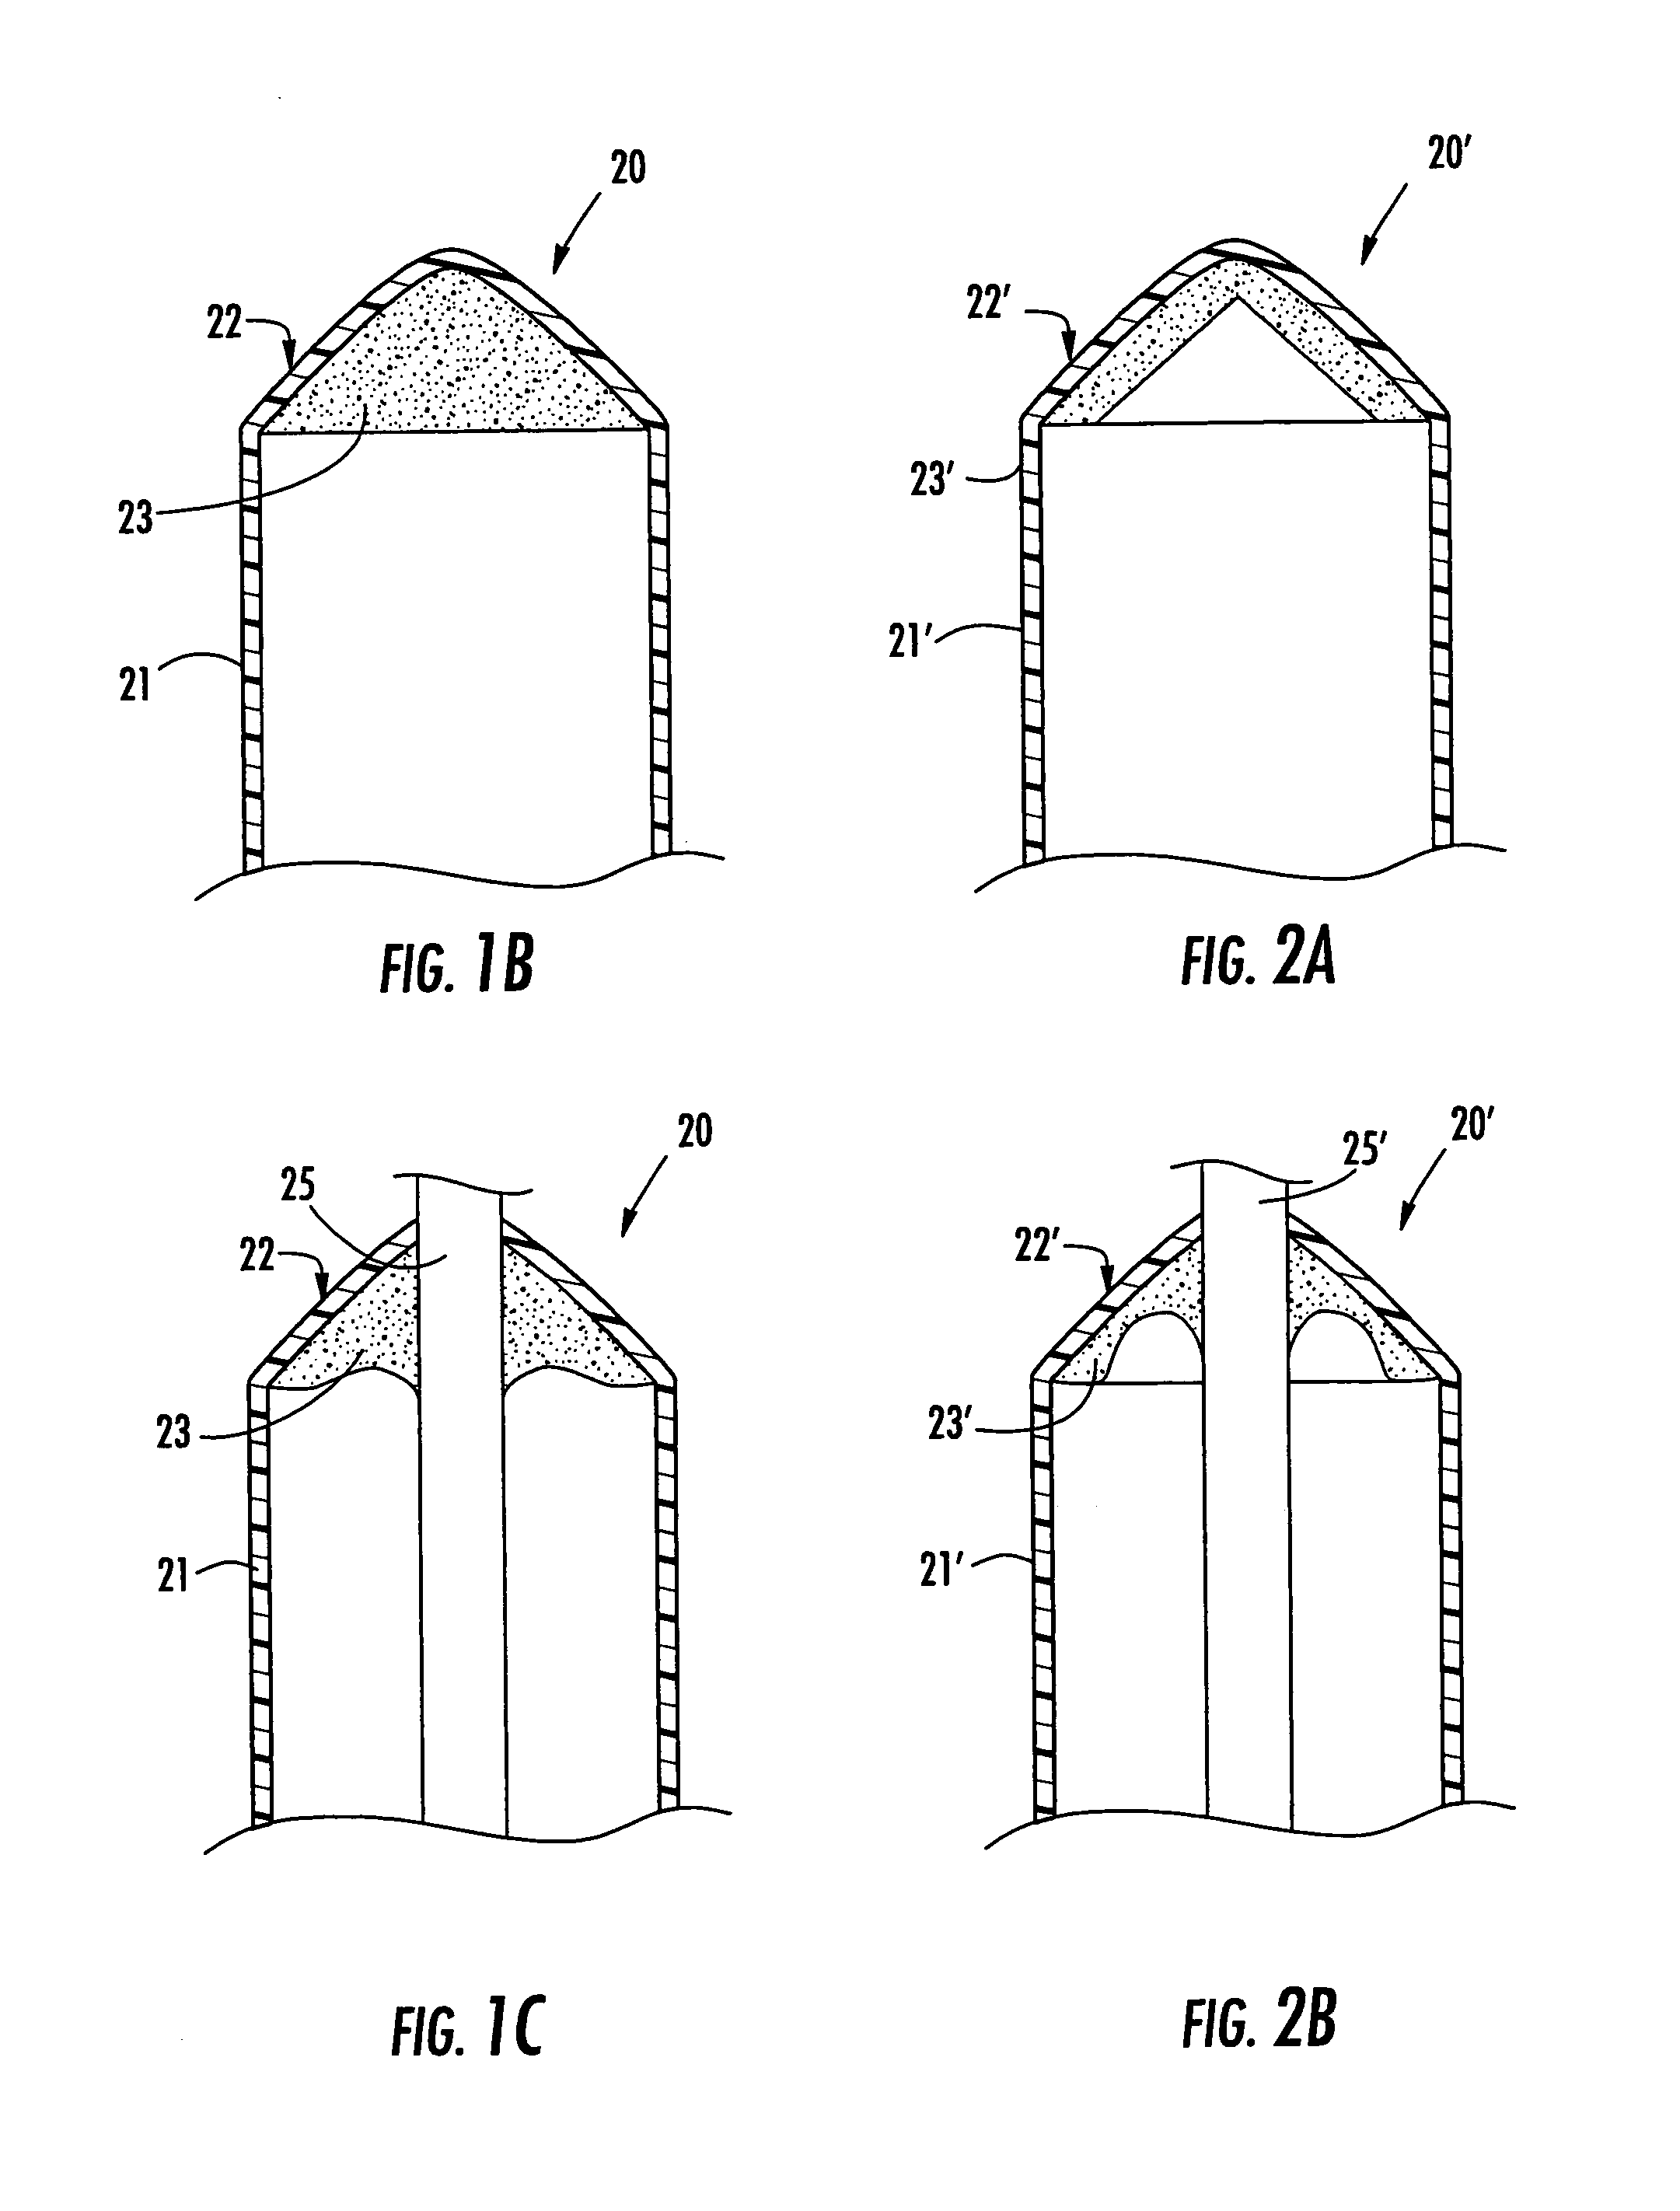 Connector and insulating boot for different sized conductors and associated methods